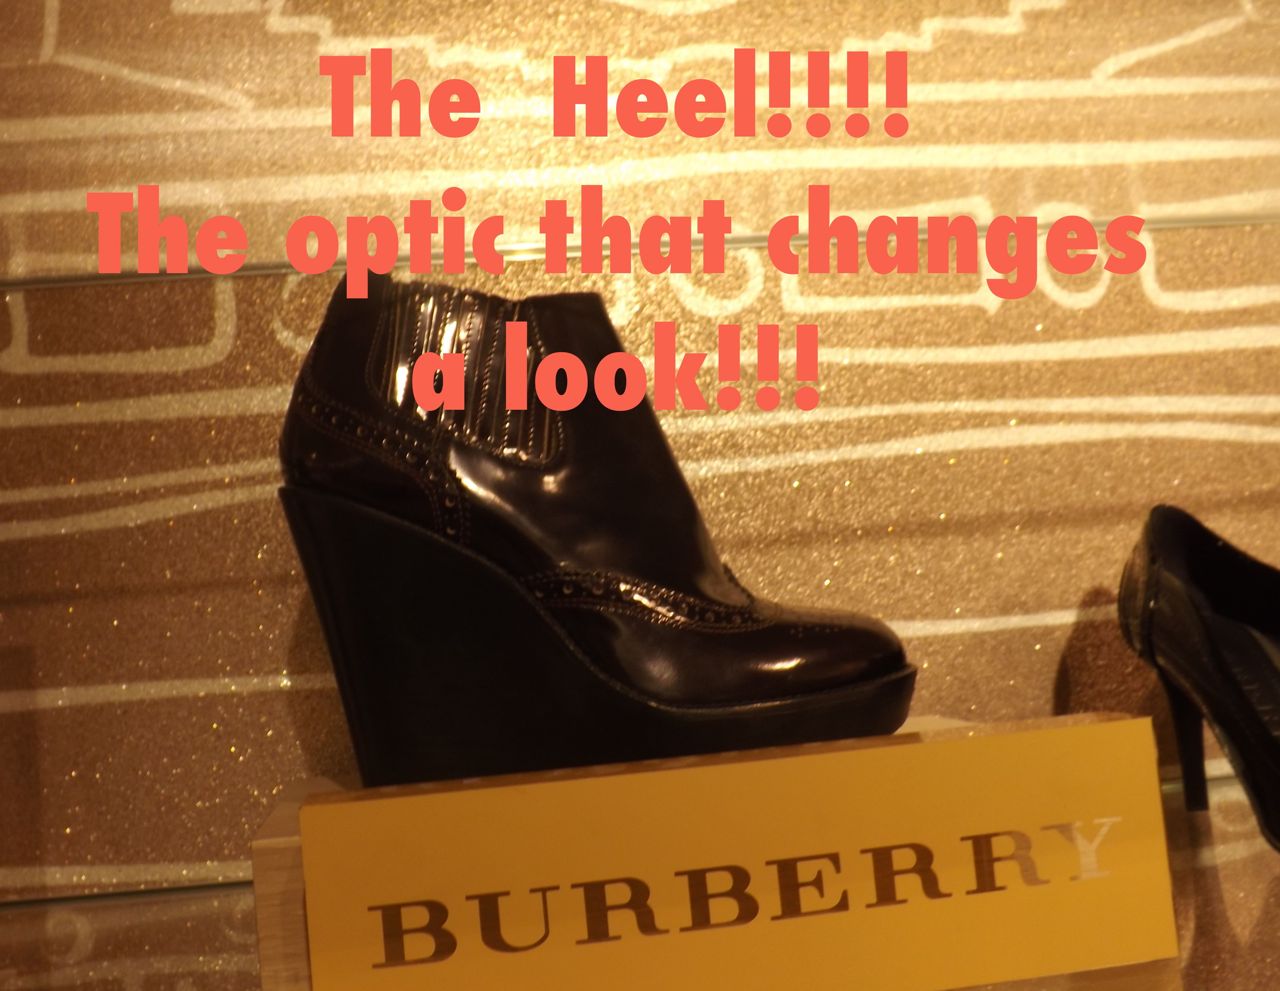 <!--:en-->The Fashionable Heel!!!!The new vocal point of the Shoe !!<!--:-->